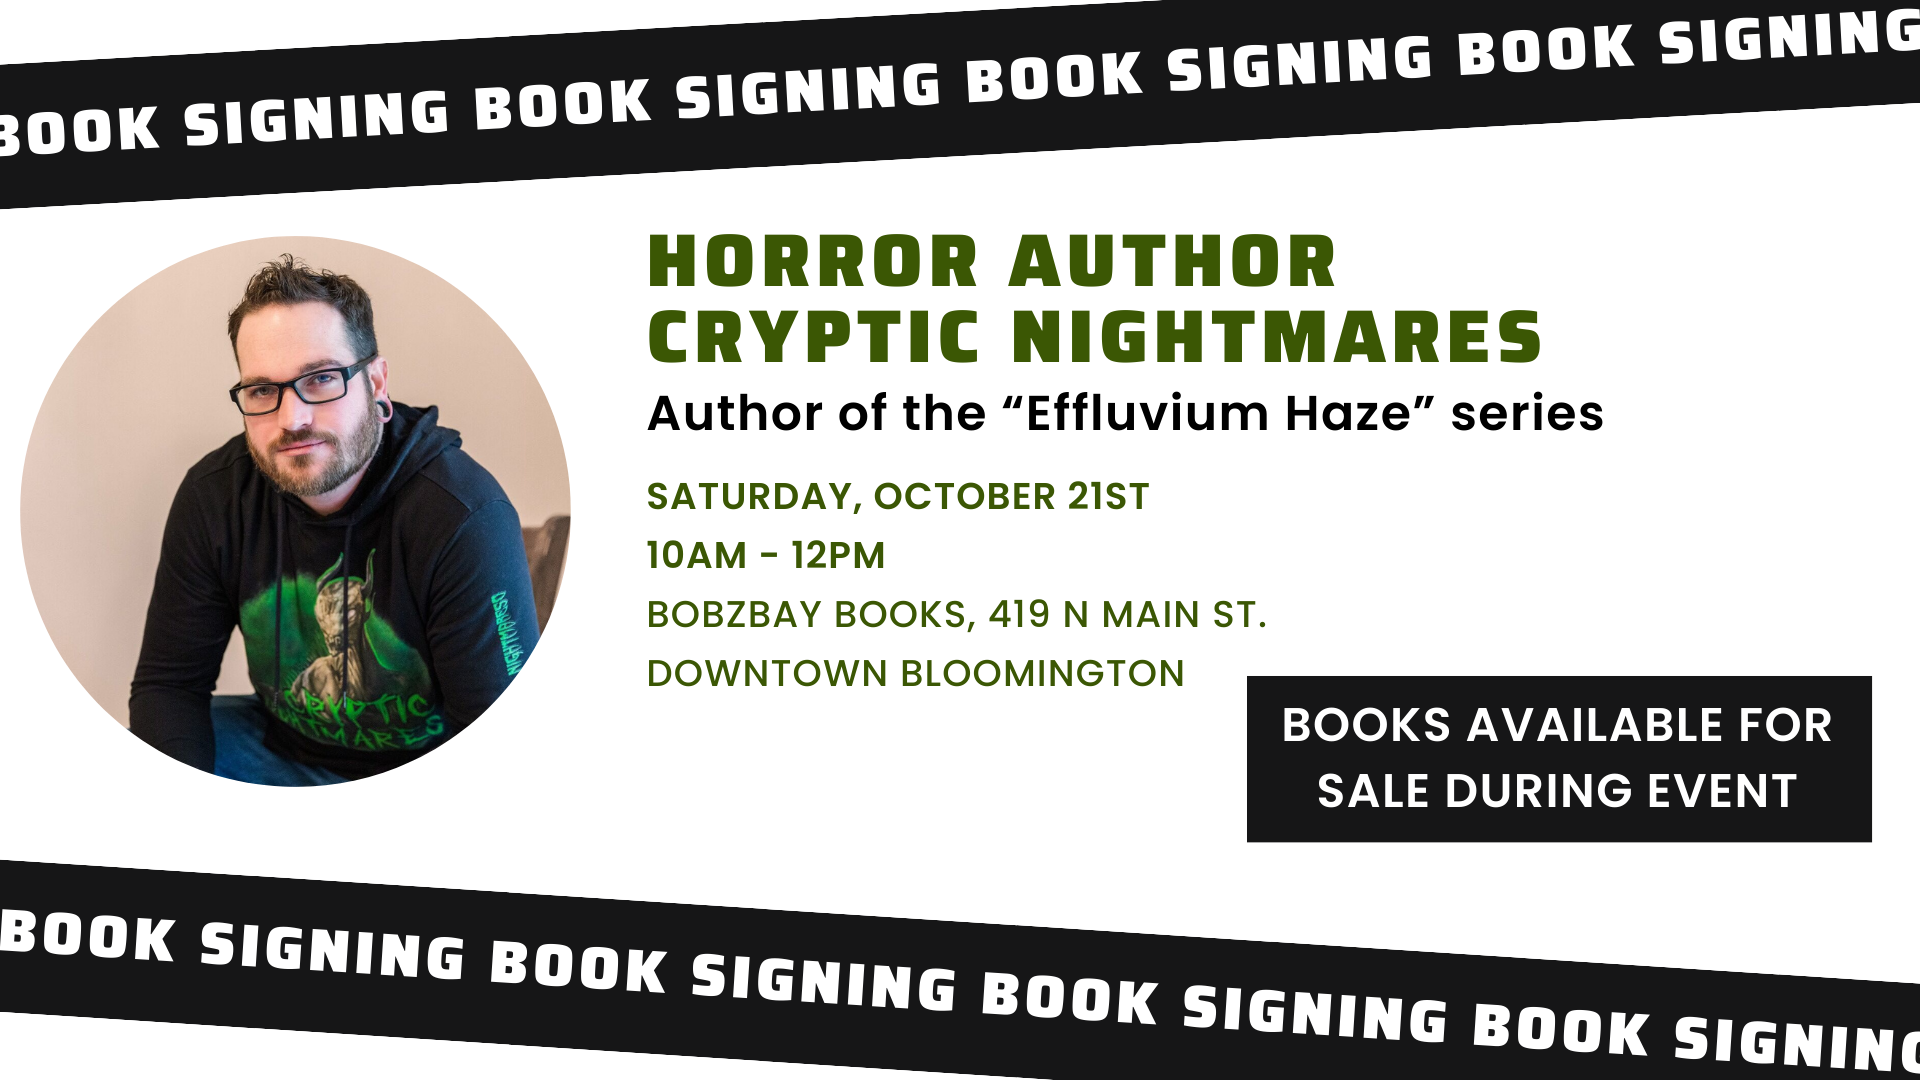 Book Signing with Local Horror Author Cryptic Nightmares